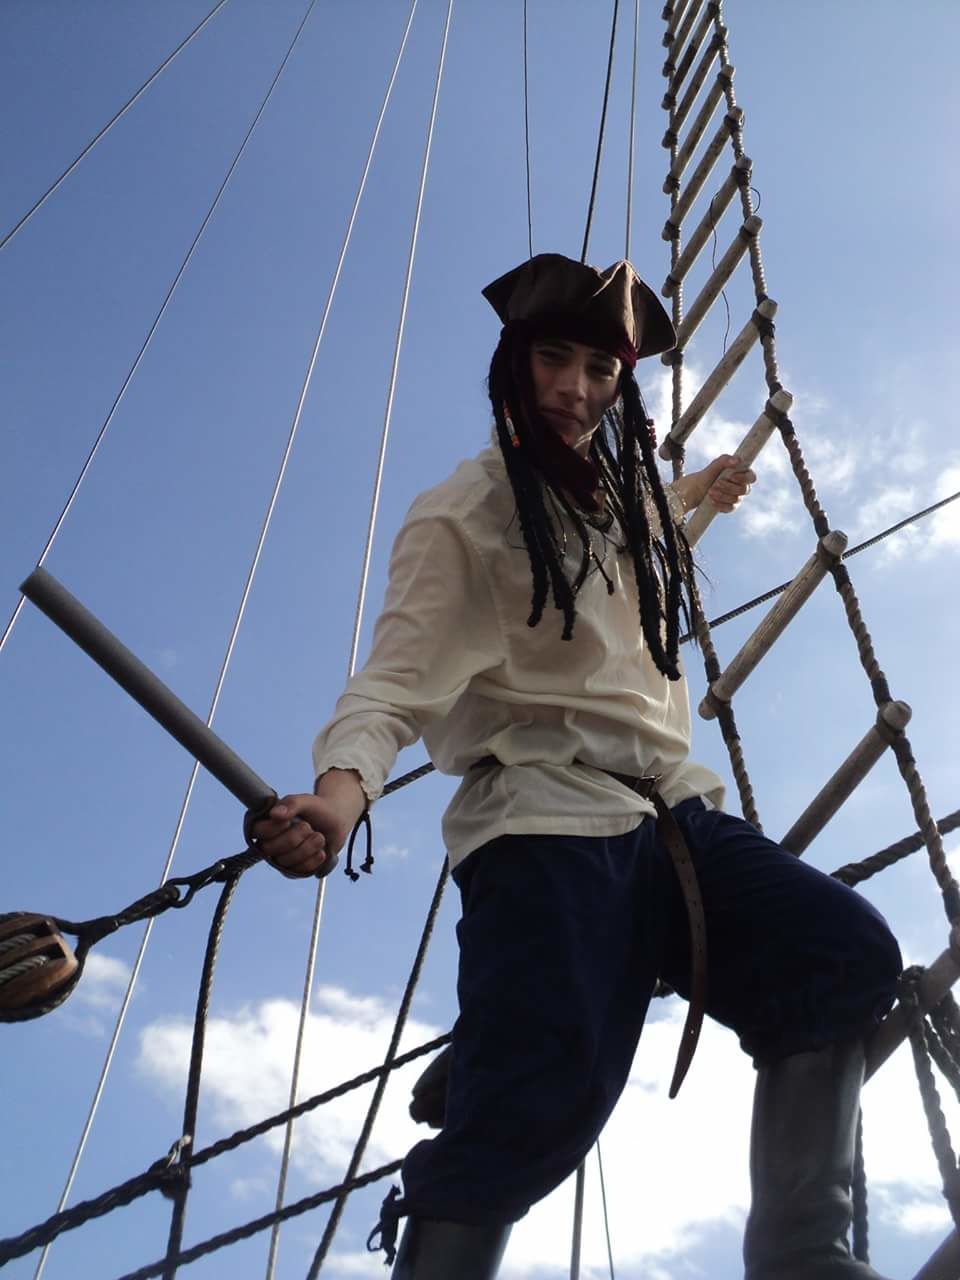 Low angle view of person wearing pirate costume